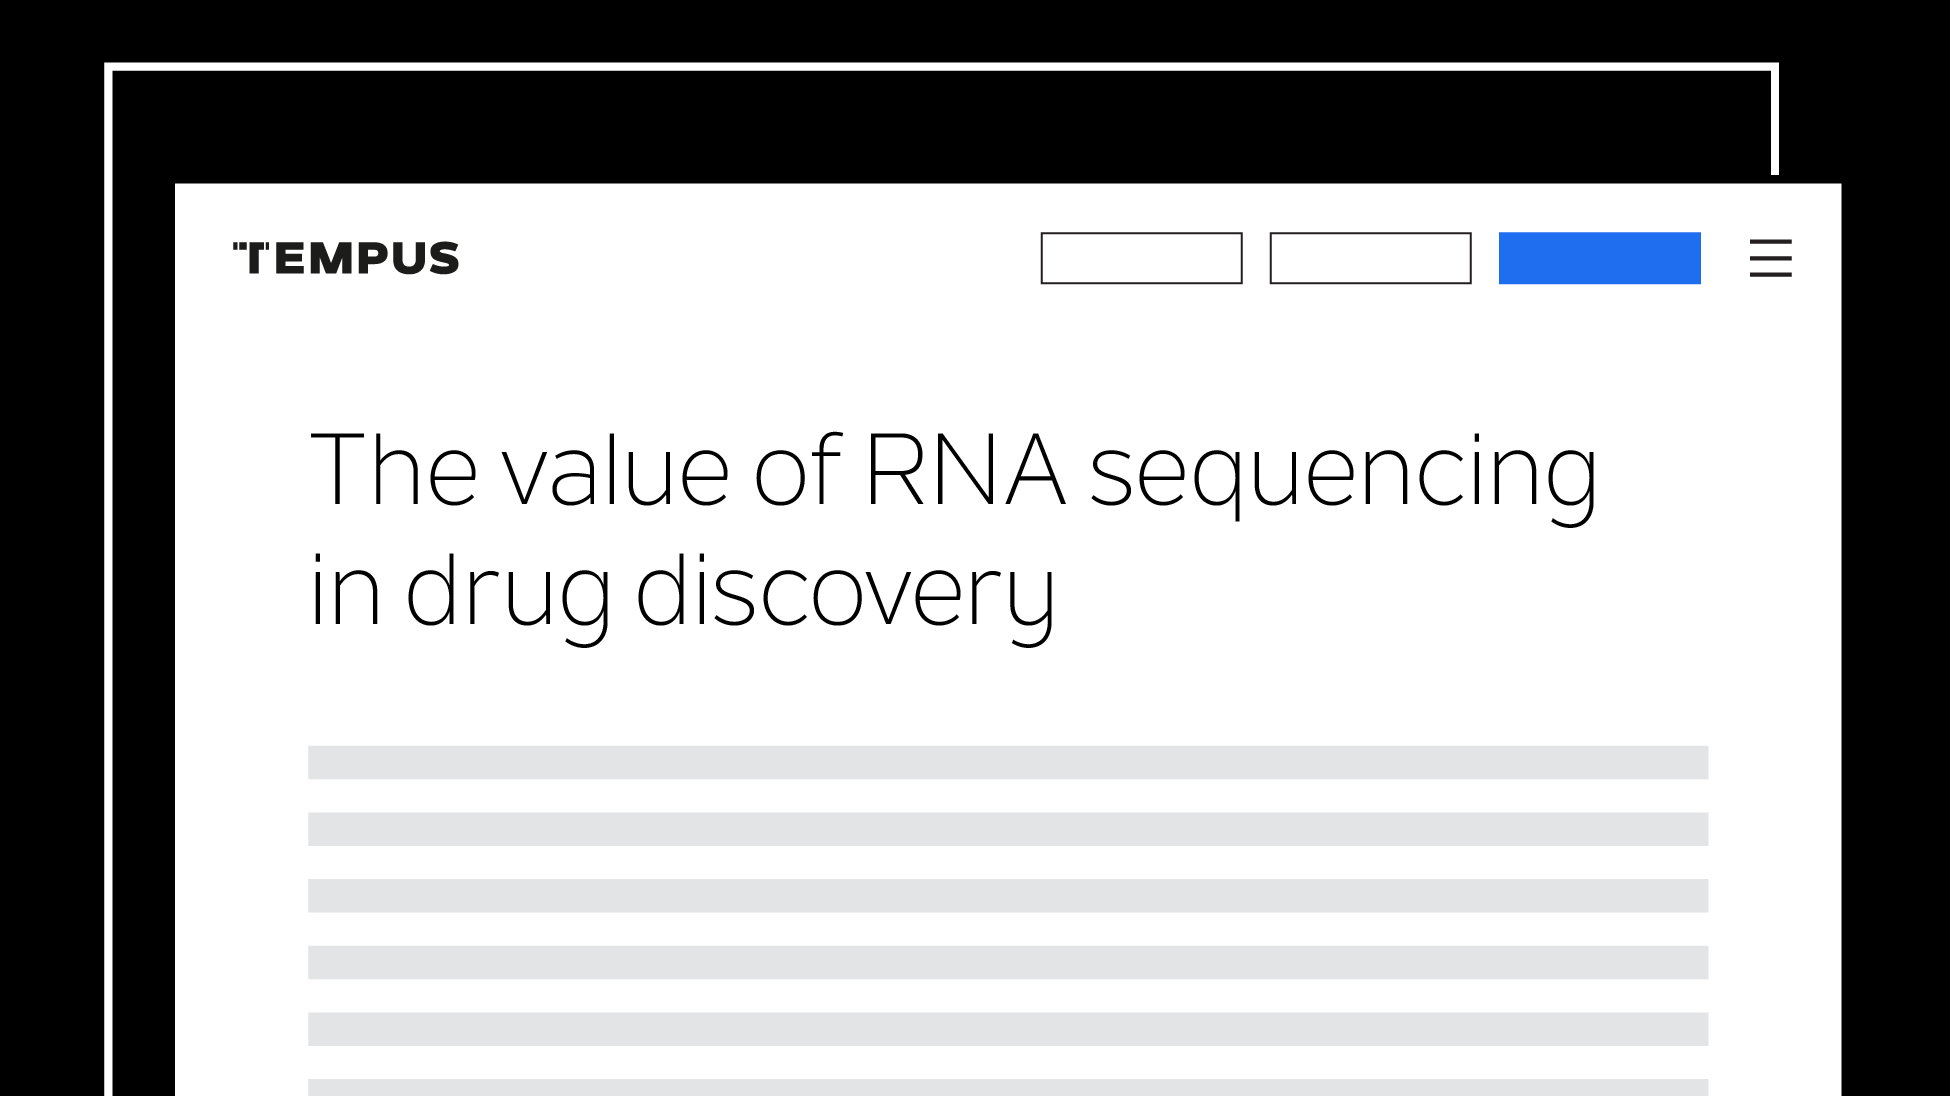 The value of RNA sequencing in drug discovery